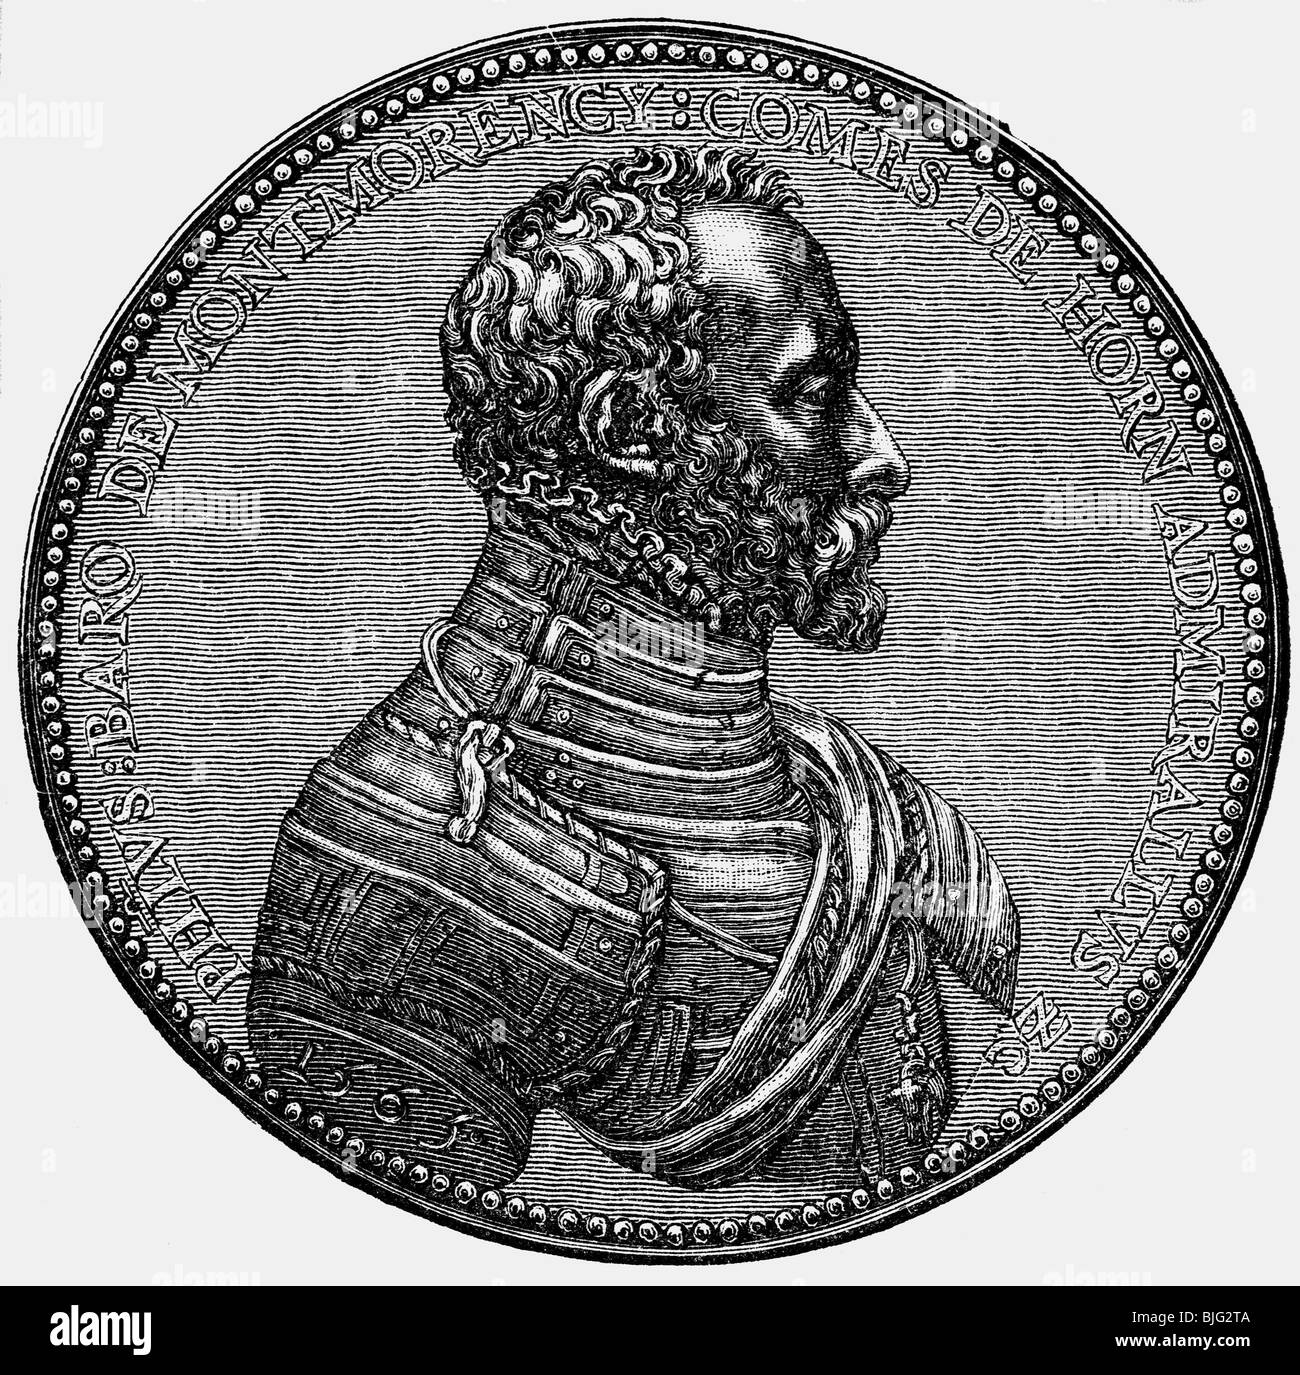 Montmorency, Philip of, count of Hoorn, 1526 - 5.6.1568, Dutch admiral, Stadtholder of Guelders 1555 - 1568, portrait on coin, wood engraving, 19th century, , Stock Photo